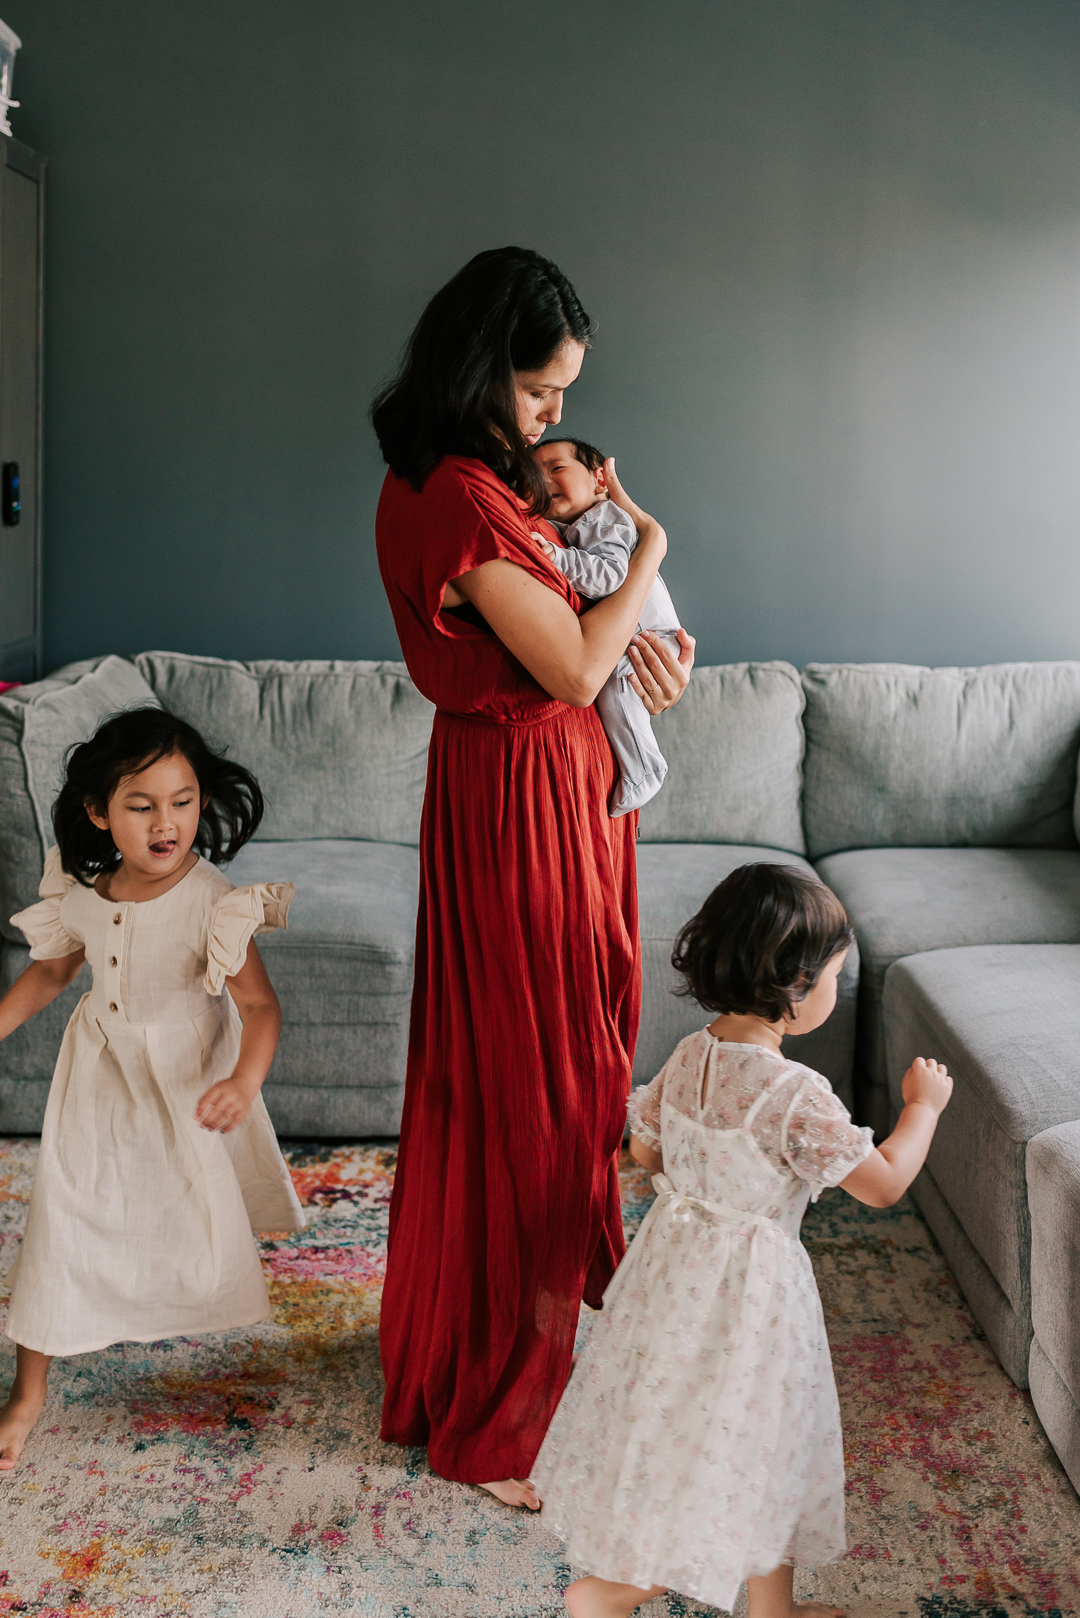 A mom in a red dress stands in a living room cradling her newborn baby while her two young daughters play around her